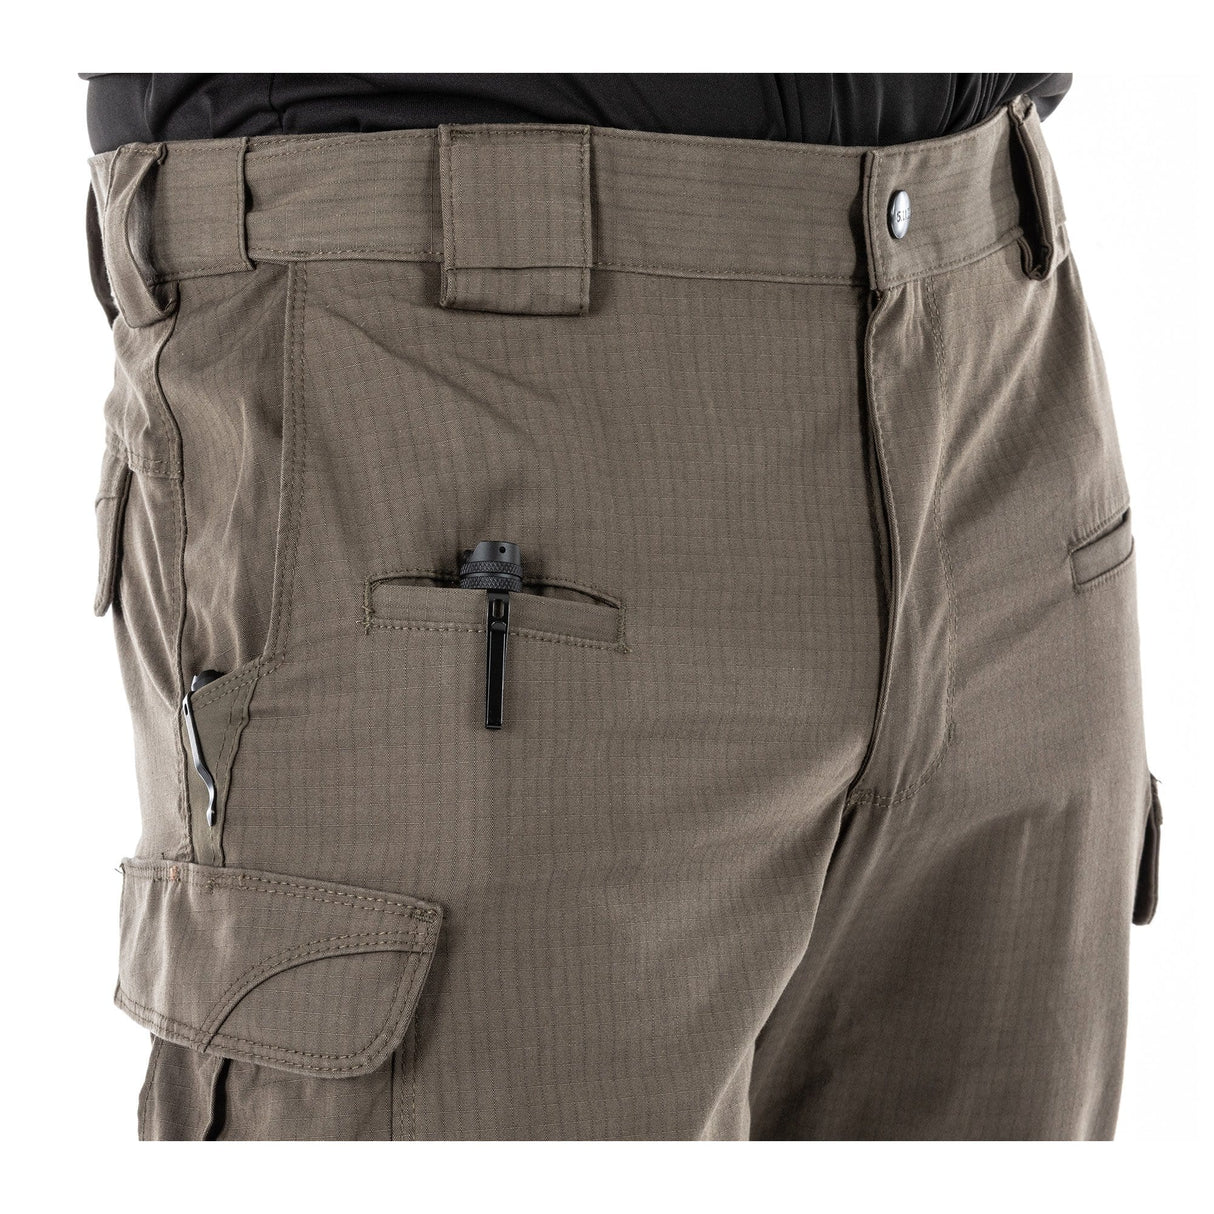 STRYKE® PANT TUNDRA - 5.11 Tactical Finland Store